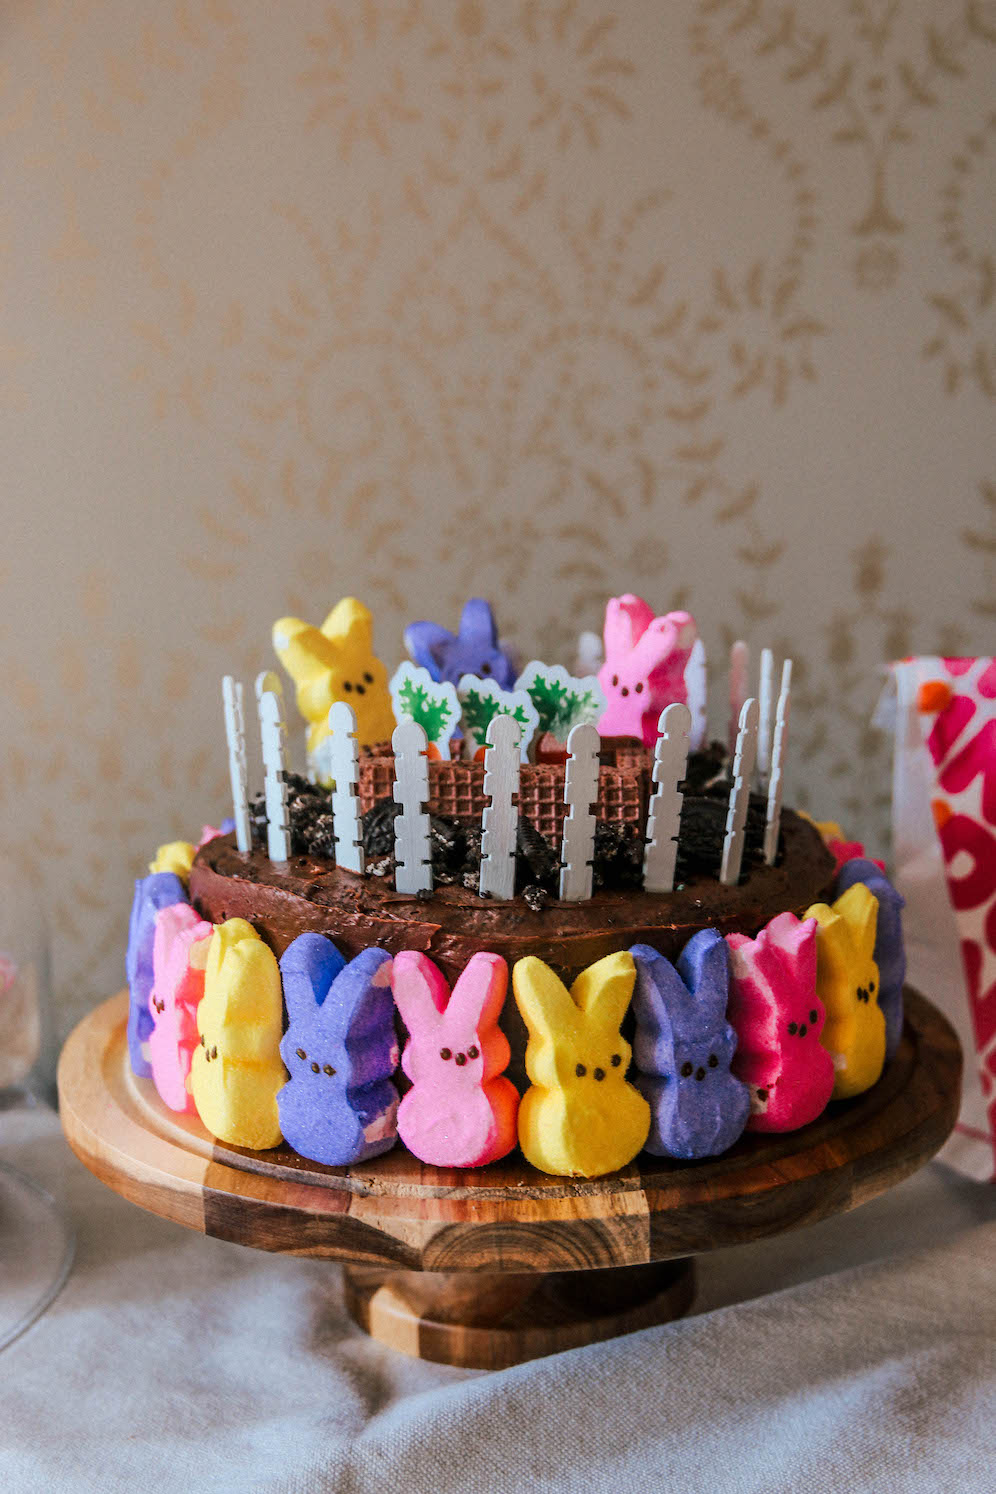 A Peep Inspired Cake Just In Time For Easter